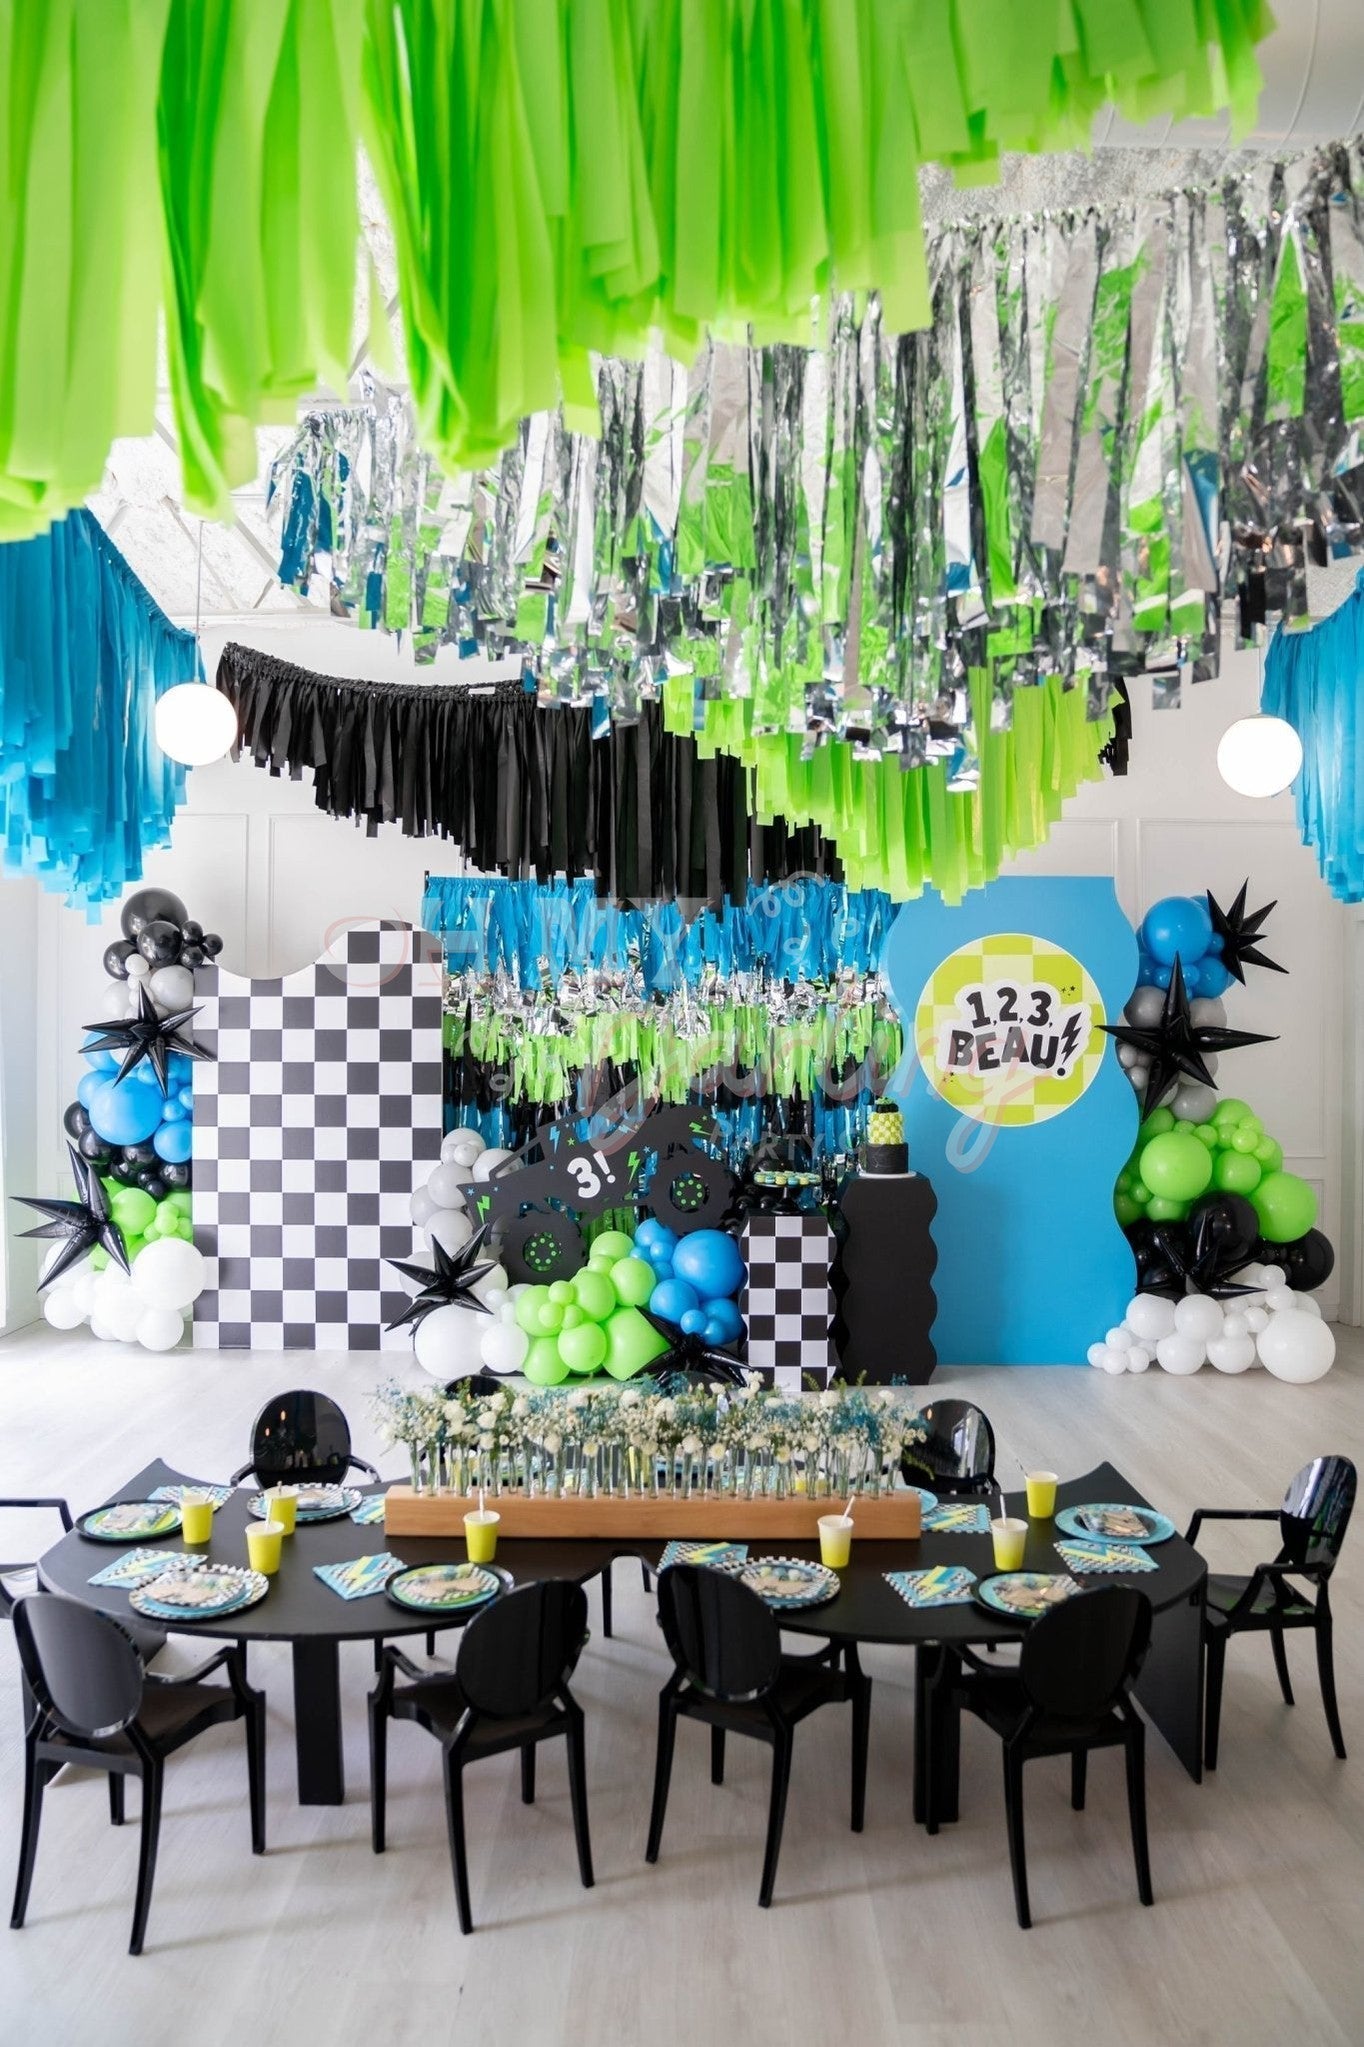 Monster Truck Bash Backdrop-Fringe Backdrop-Party Decor-Oh My Darling Party Co-Oh My Darling Party Co-backdrops for party, balloon garlands, birthday boy, birthday decorations, black, black and silver party, black backdrops, blue, BLUE BACKDROP, BLUE BACKDROPS, blue party, boy baby shower, boy birthday, boy party, boy shower, boys birthday, car, cars, first birthday, fringe garland, Fringe Streamers, green, GREEN BACKDROP, GREEN BACKDROPS, happy birthday collection, lime green, metallic aqua, metallic backd